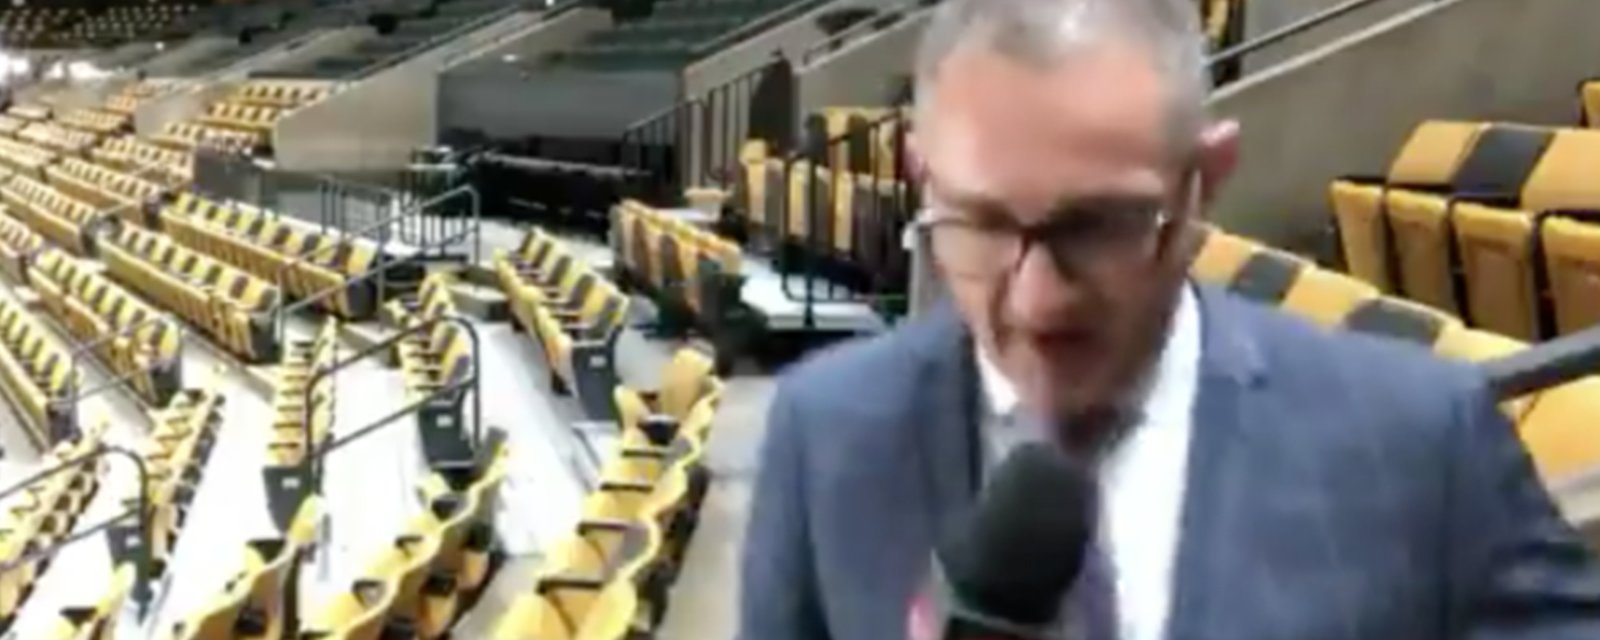 Reporter screams live on air after seeing a rat in TD Garden